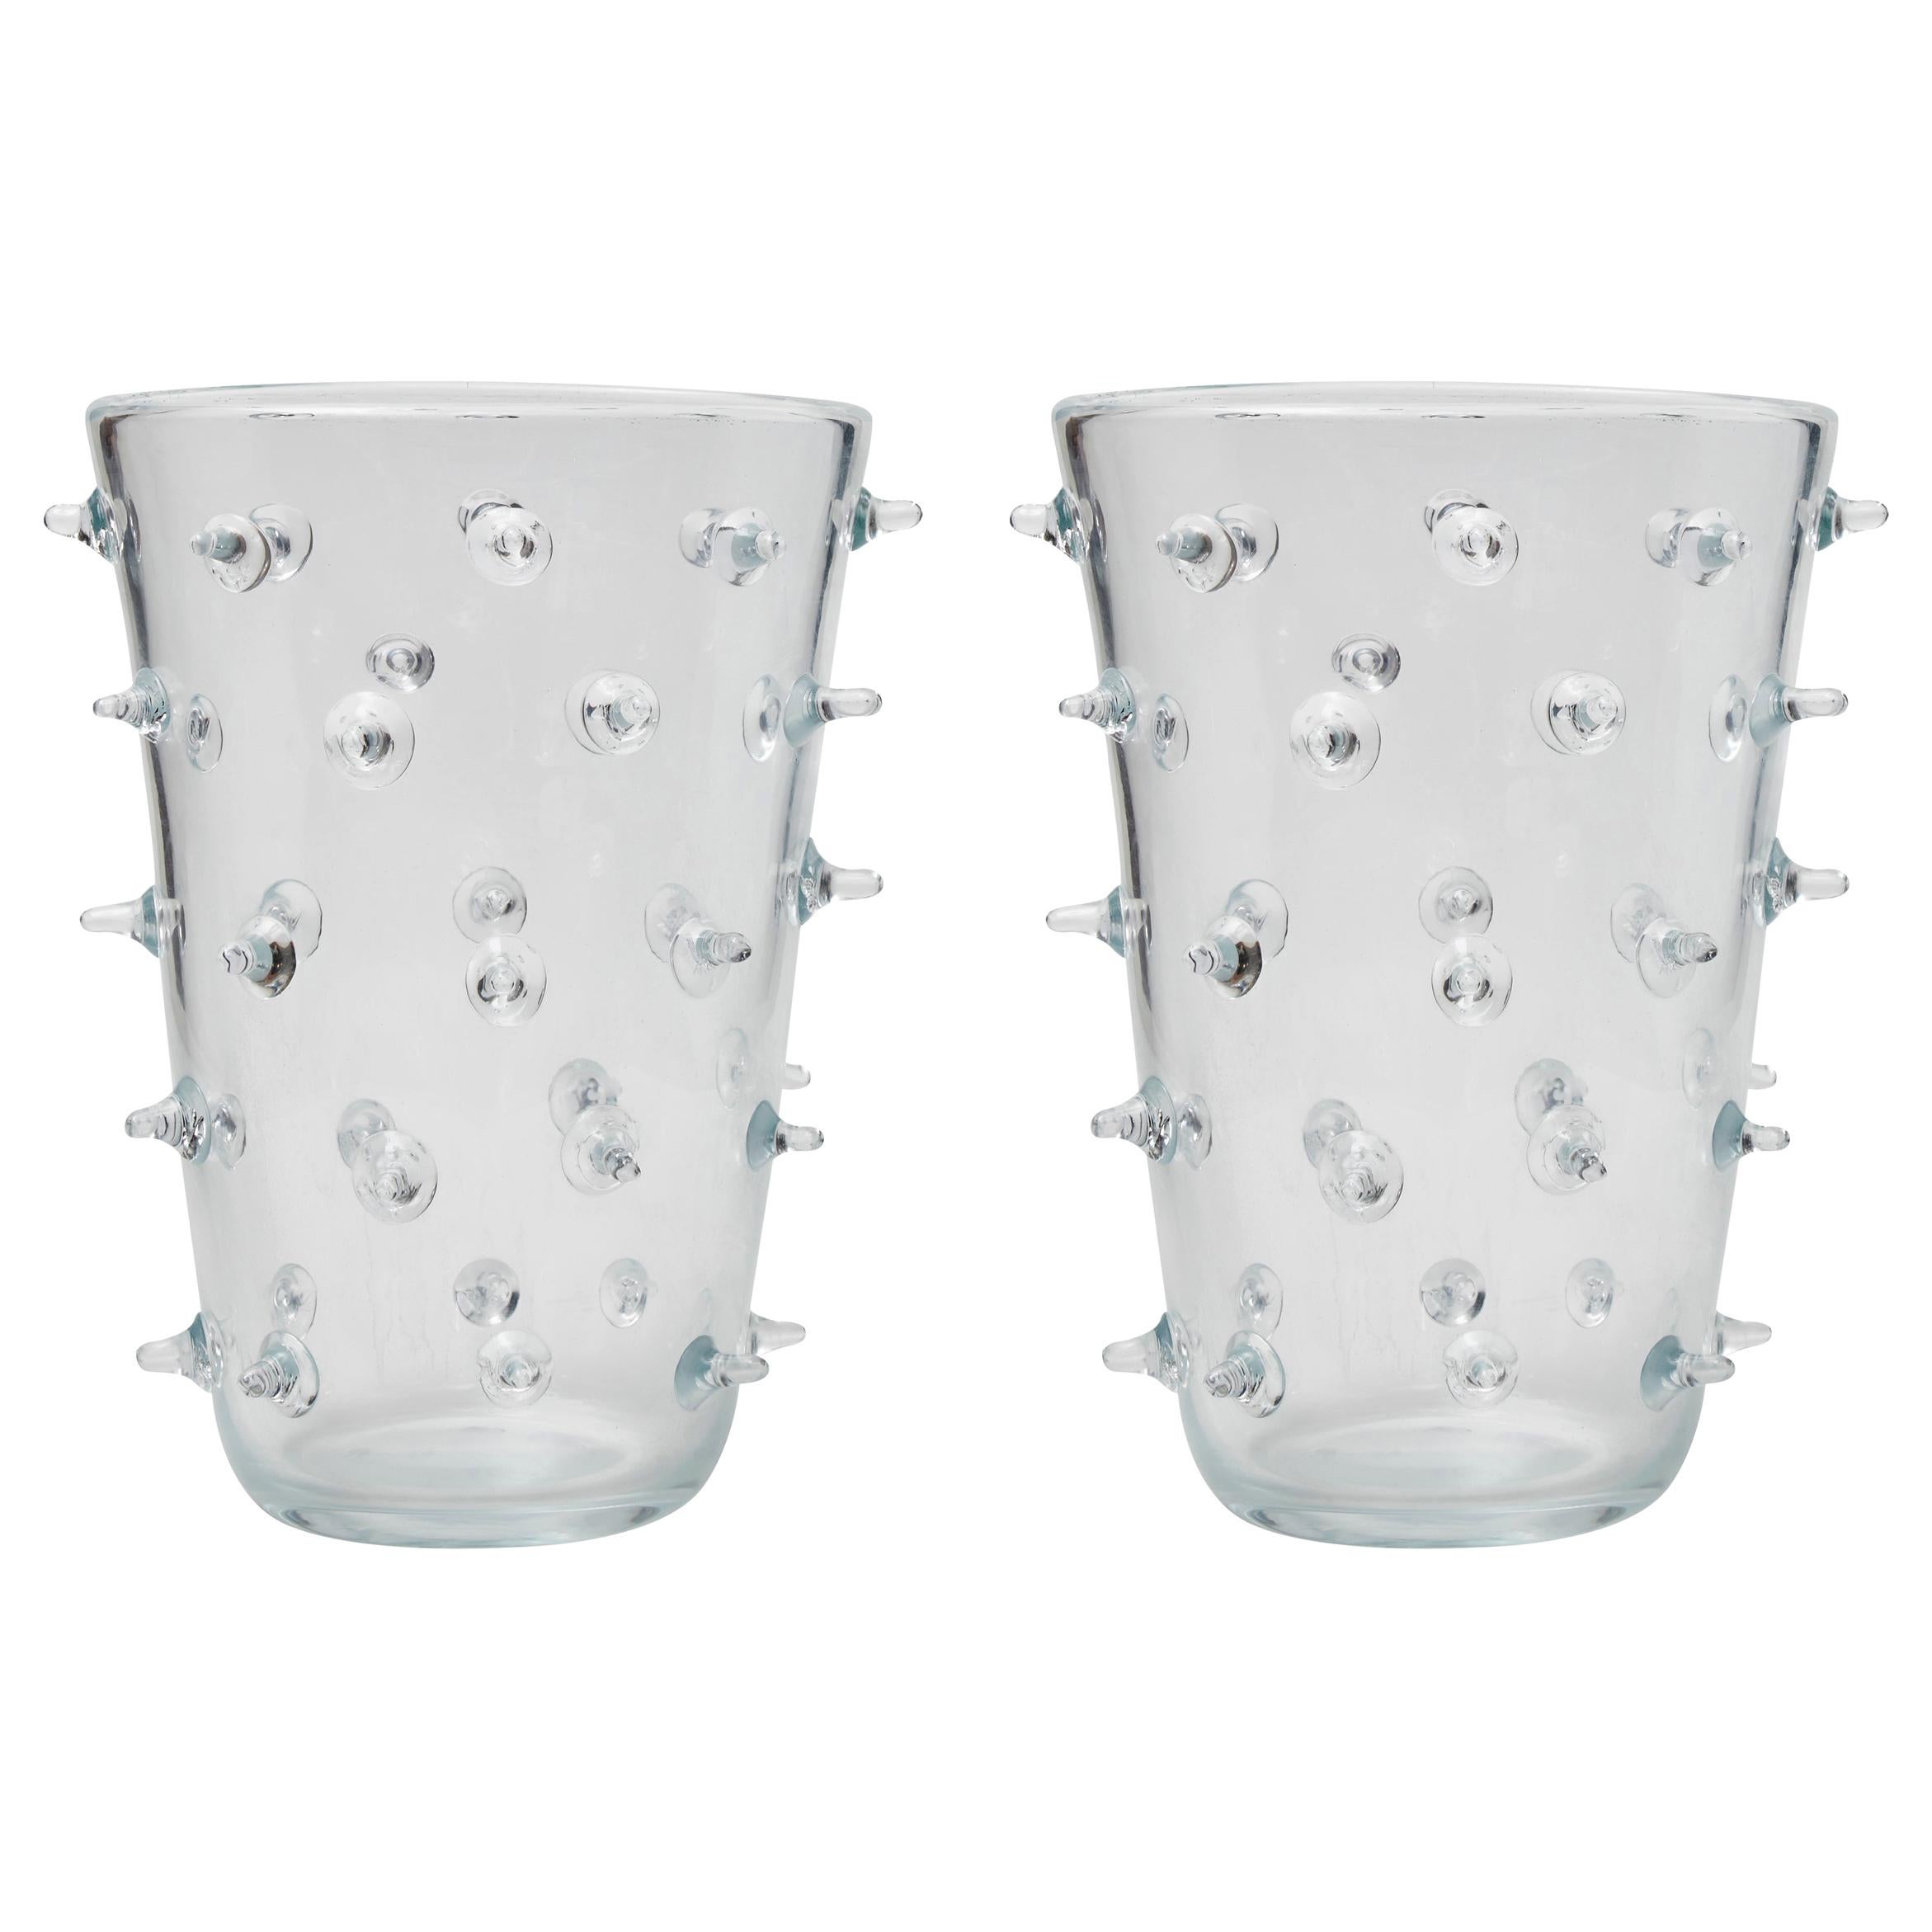 Pair of Clear Murano Glass Vases with Spikes